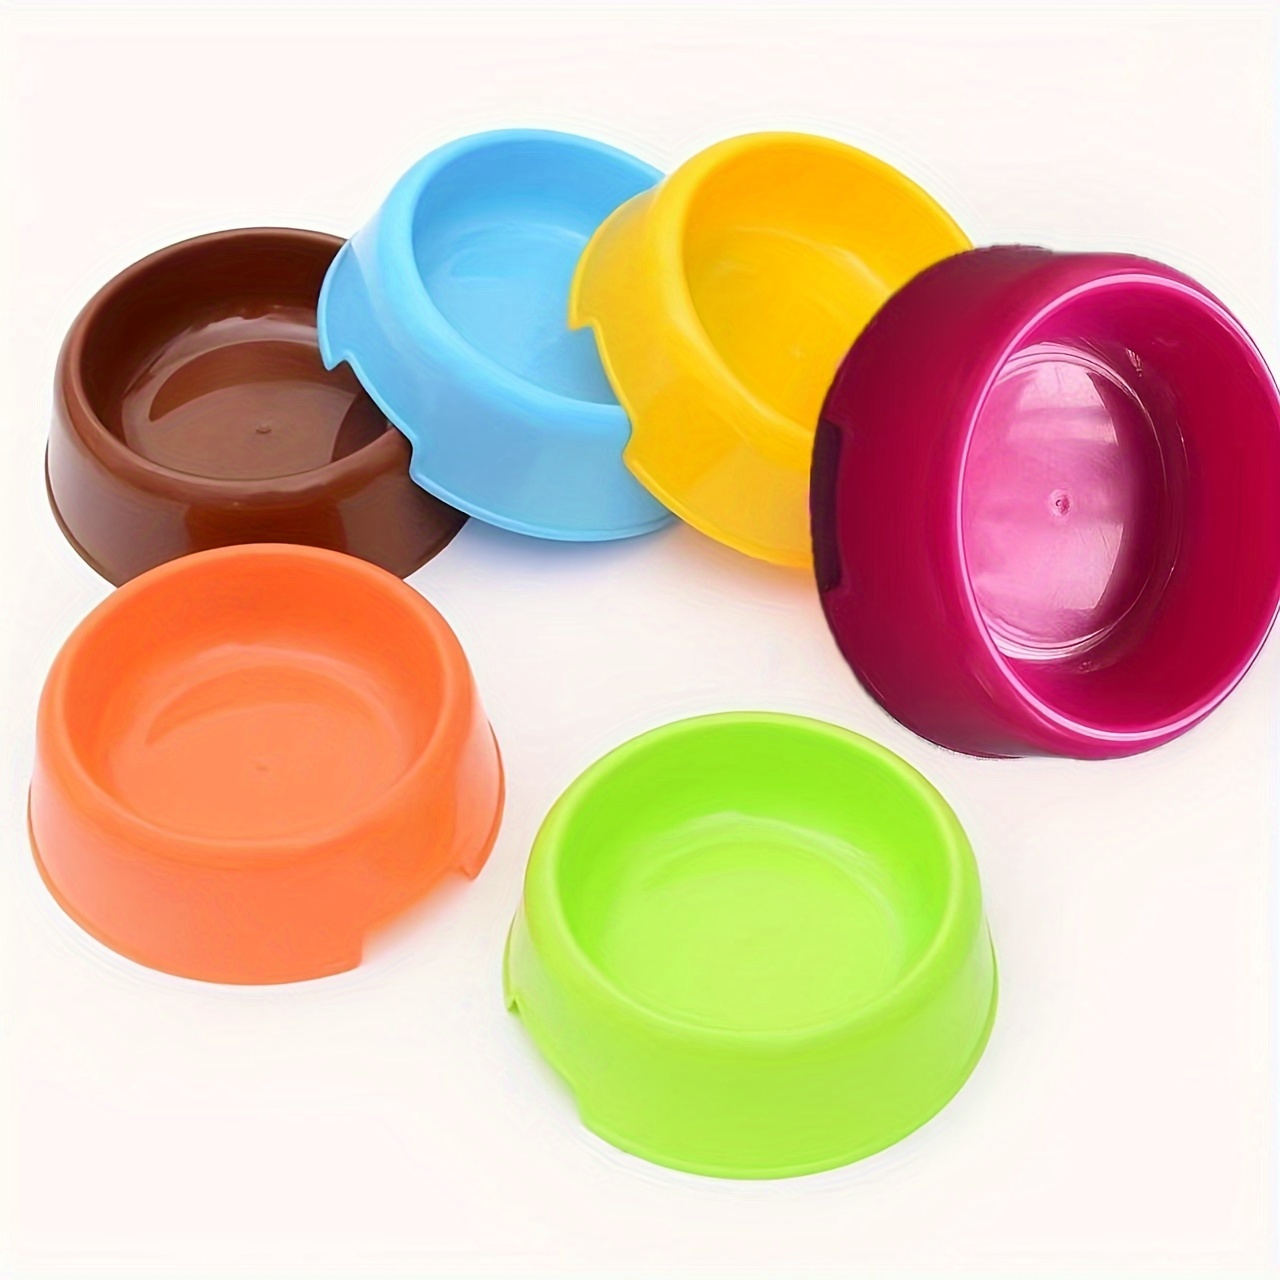 

6-piece Assorted Candy Colors Pet Bowls For Dogs & Cats - Durable Plastic Food And Water Dishes Set